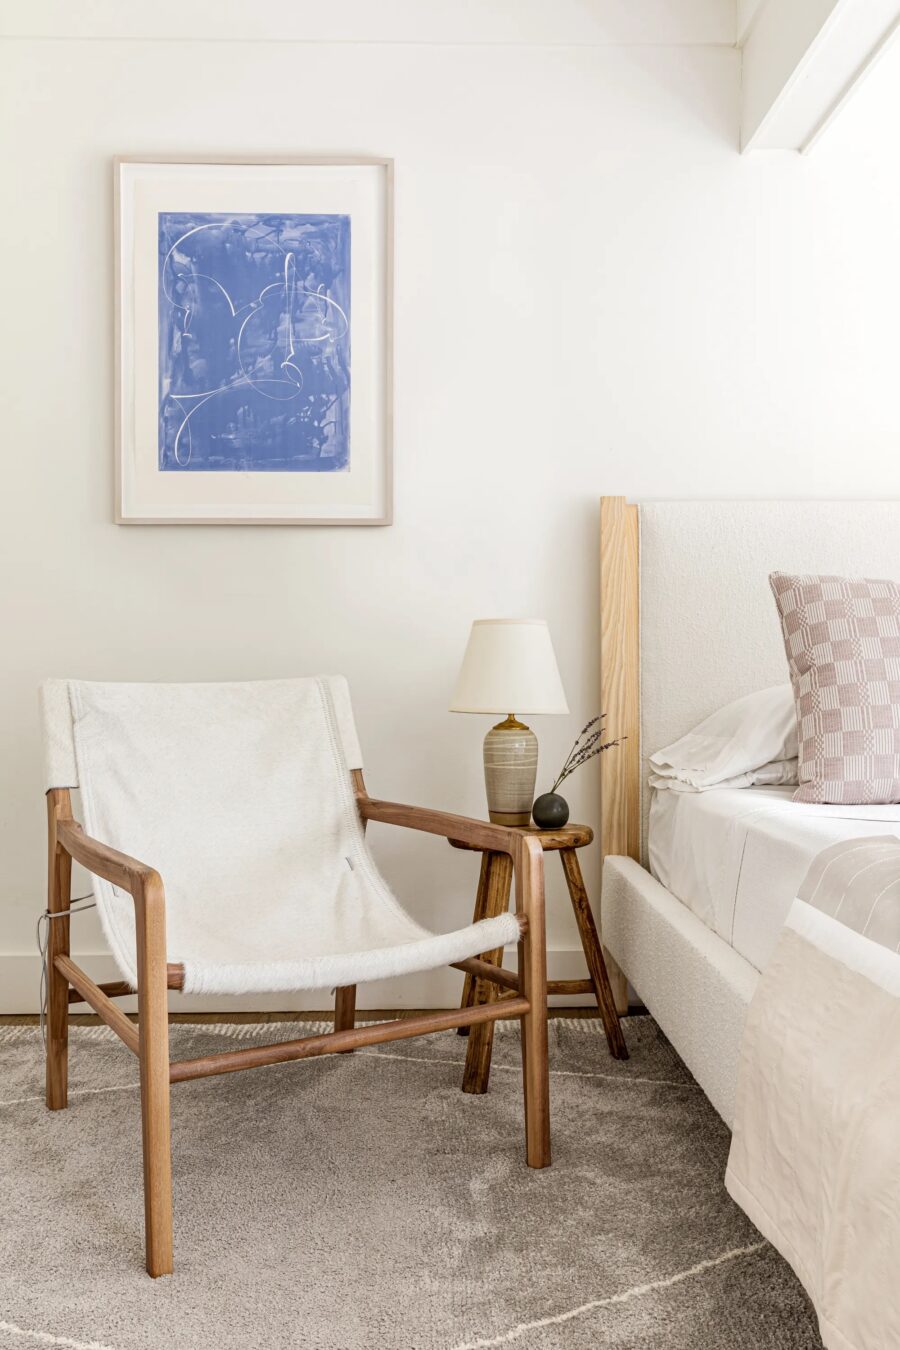 A modern bedroom featuring a wooden chair with a white sling seat, a small wooden side table holding a lamp and decor, and a white bed. A blue abstract painting hangs on the wall above the chair.